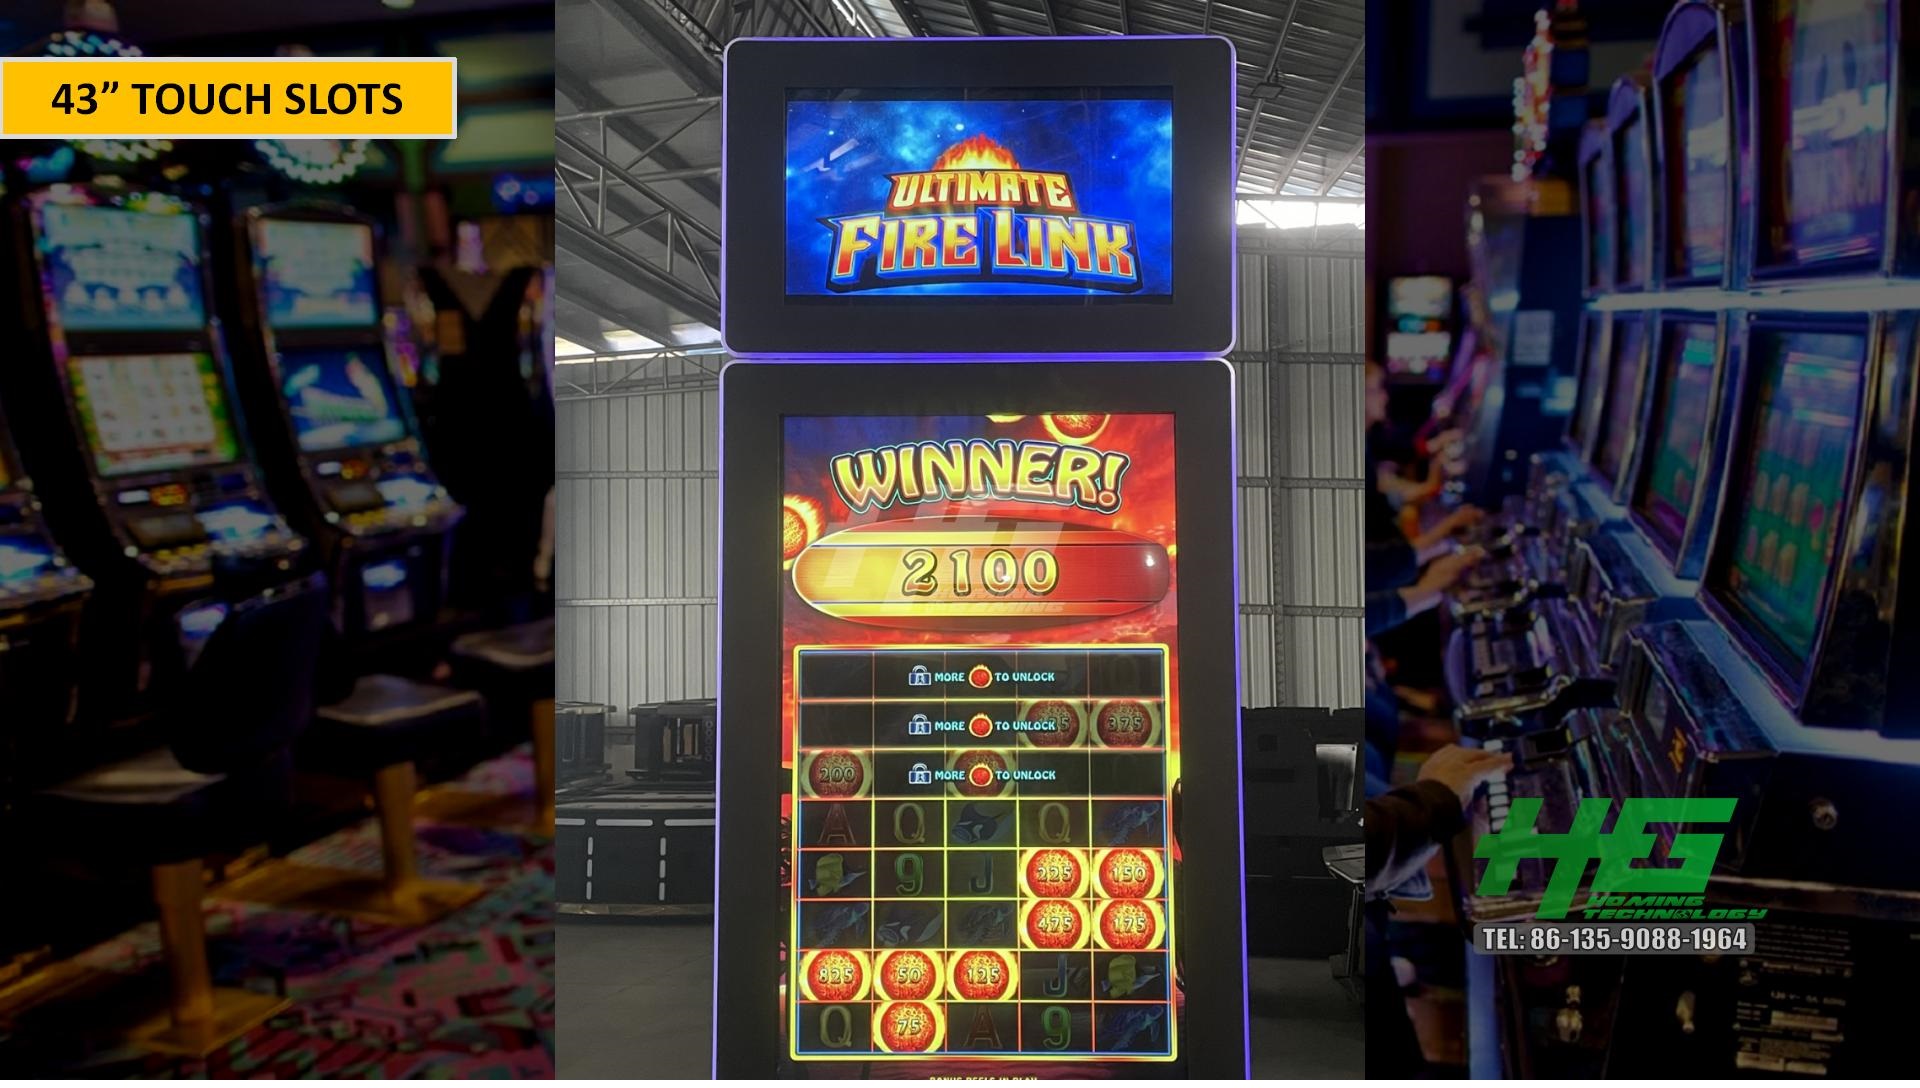 slot machine,slot game,slot game machine,slot gambling,casino machine,us slot machine,slot cabinet,43 inch slot cabinet,43 inch slot game machine,43 inch slot table,touch panol,cash machine,new slot machine,new slot cabinet,casino slot machine,fire link slot game,fusion 4 slot game,buffalo gold slot game,crazy money gold,lock it link,lightning link,fusion 5,fusion 5 slot game,fusion 5 slot machine,fusion 5 casino game,fusion 5 game,fusion 5 banilla game,banilla game,fusion 5 slot gambling,fusion 5 cash machine,2021 fusion 5,fusion 5 43 inch slot machine,slot game machine,casino slot machine,slot game,casino slot gambling,43 inch slot machine,43 inch casino machine,vertical slot machine,vertical slot game,curved slot game,curved slot machine